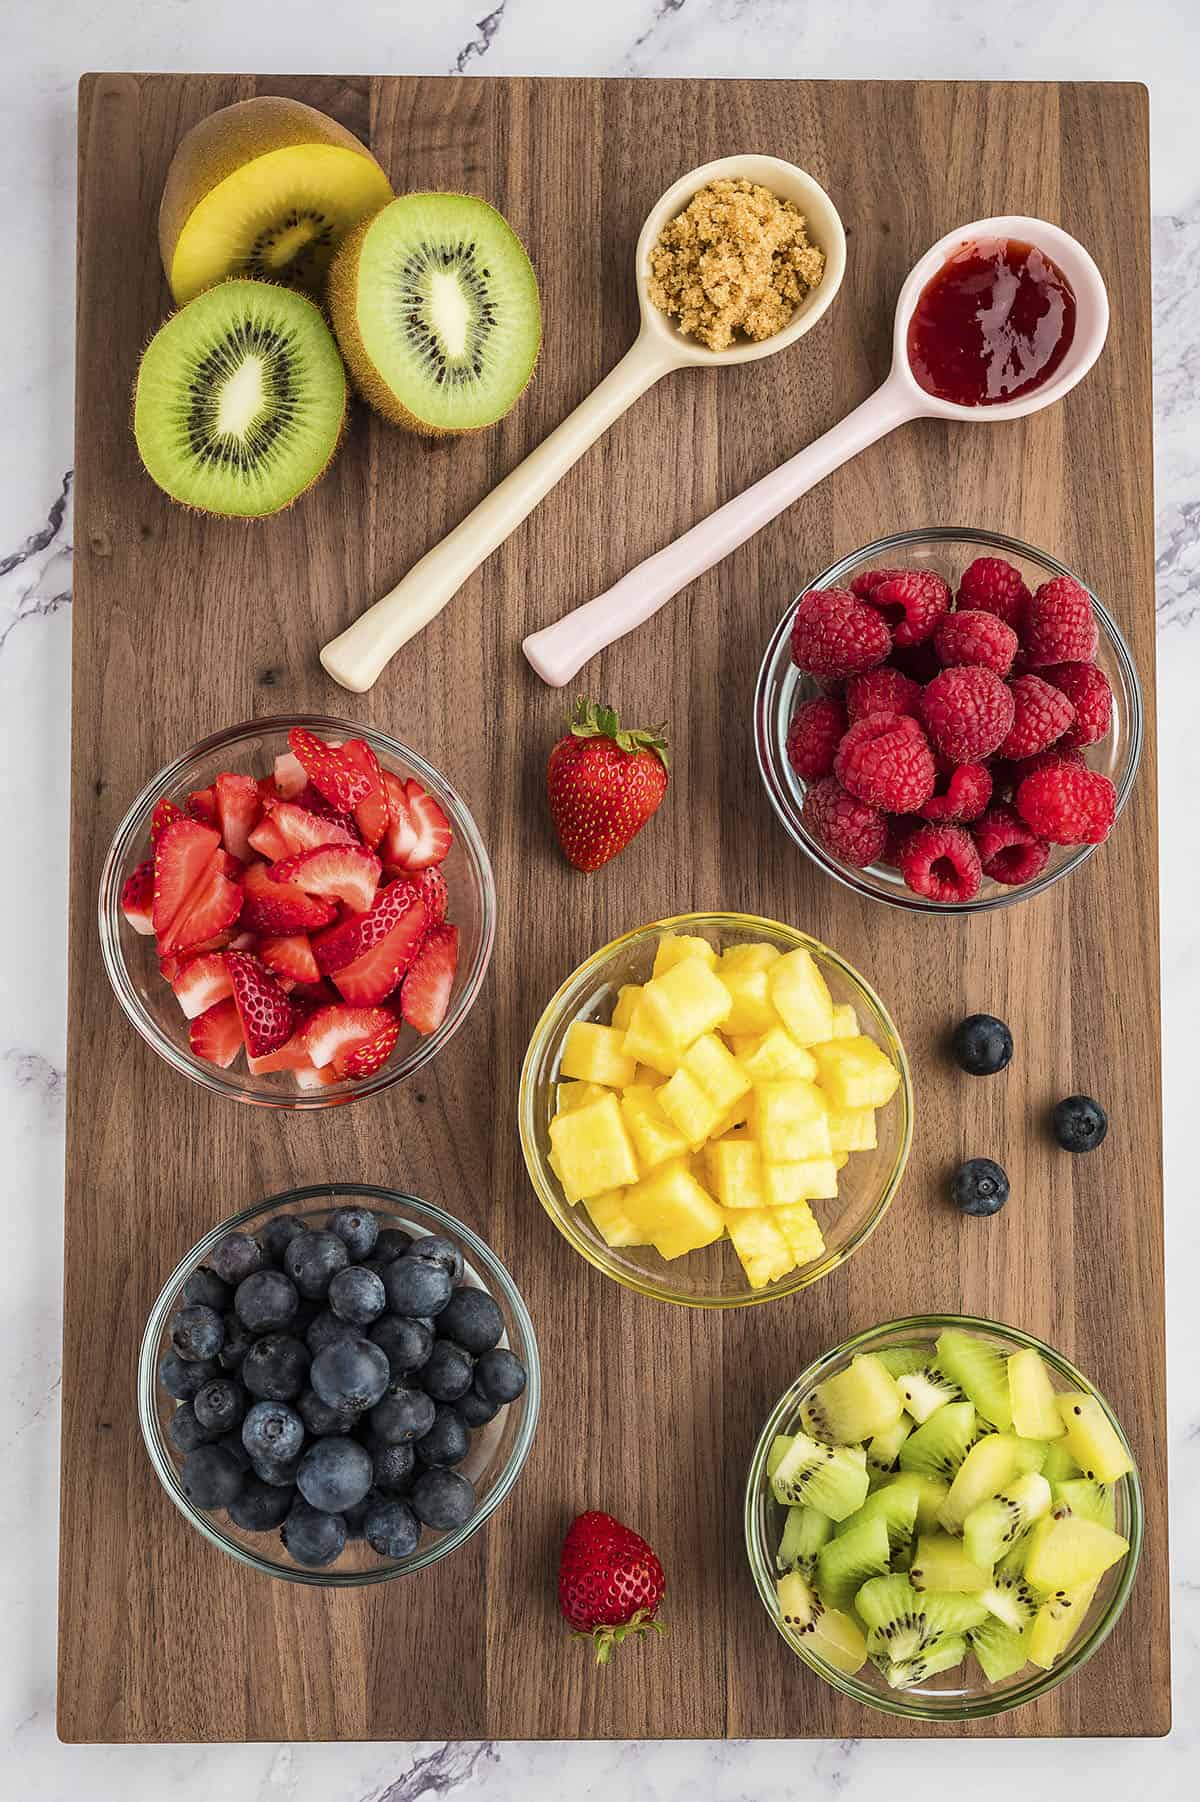 Ingredients for fruit salsa laid out on cutting board.